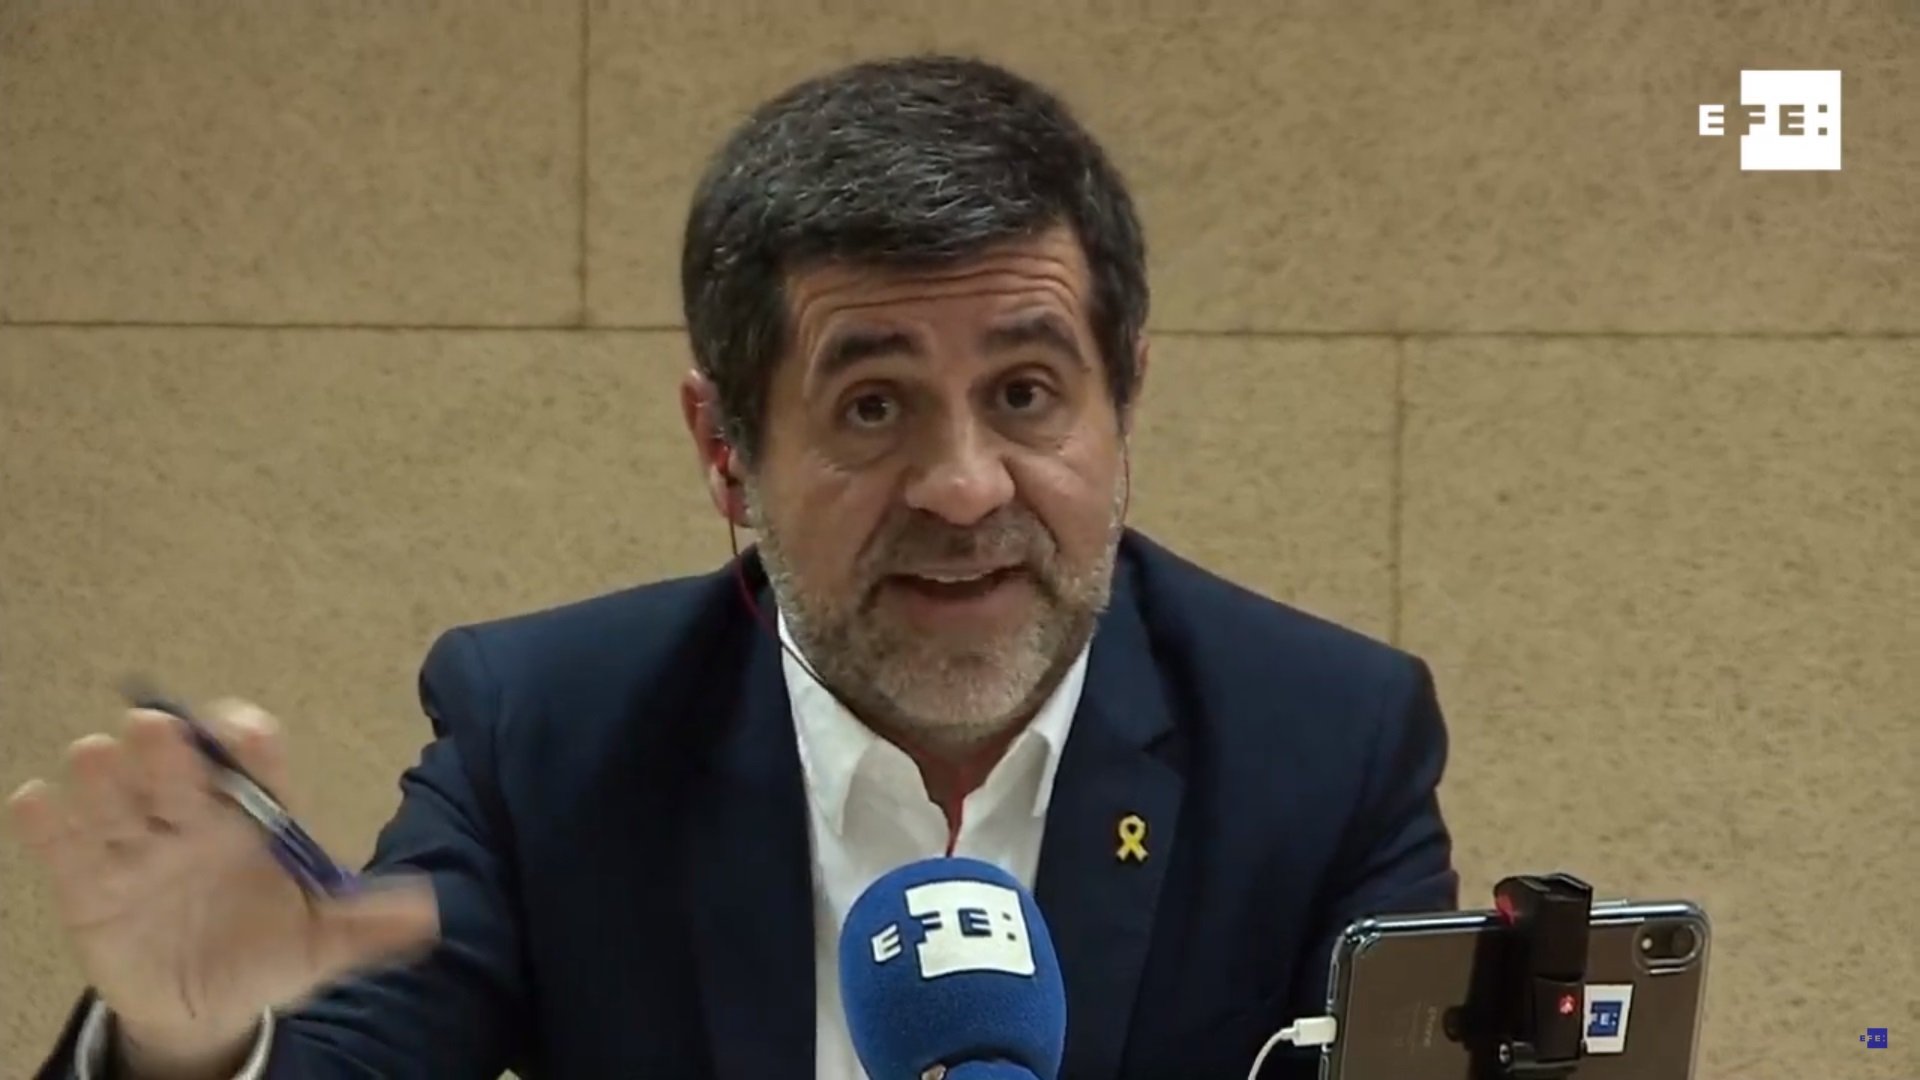 Exclusive interview with Jordi Sànchez, the day his sentence was released